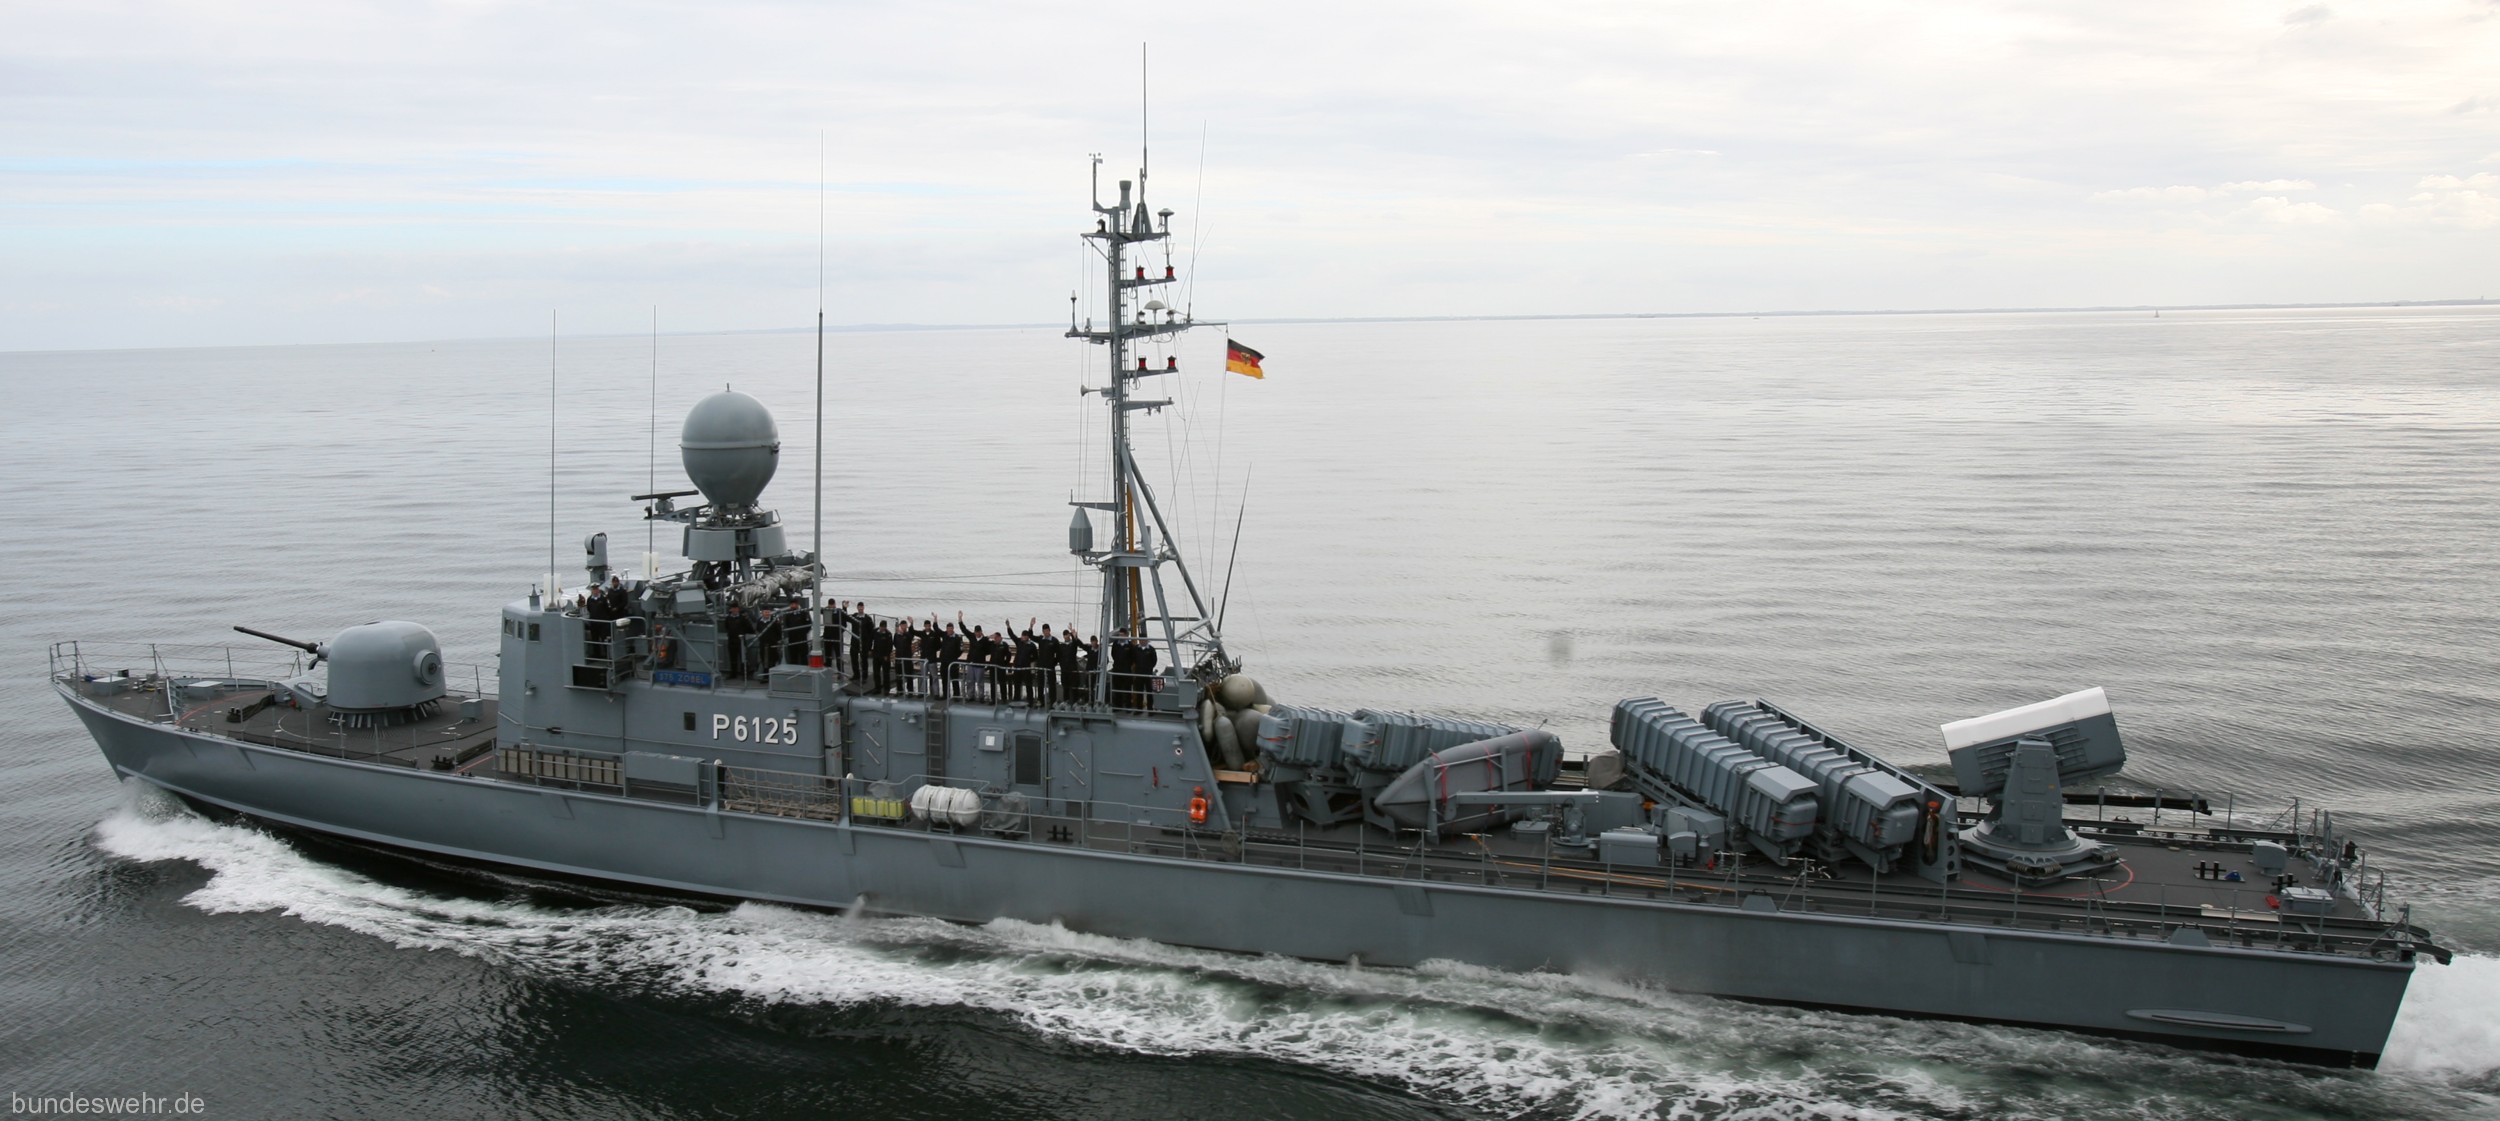 p6125 s75 fgs zobel type 143a gepard class fast attack missile craft german navy 08